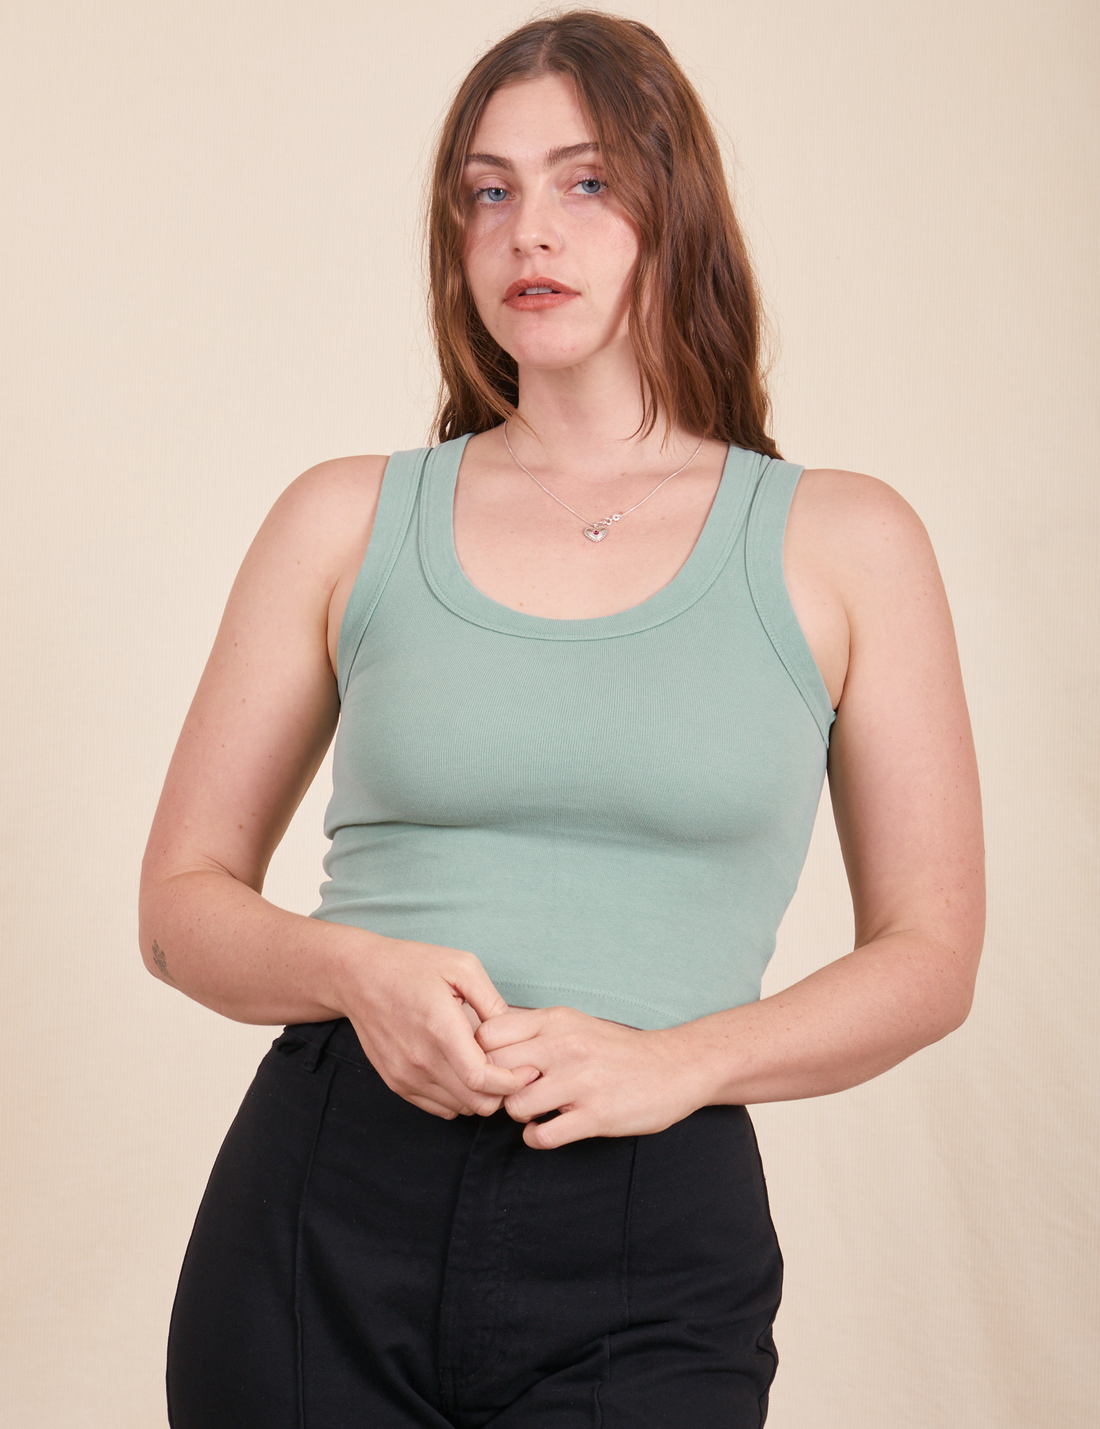 The Tank Top in Sage Green on Allison